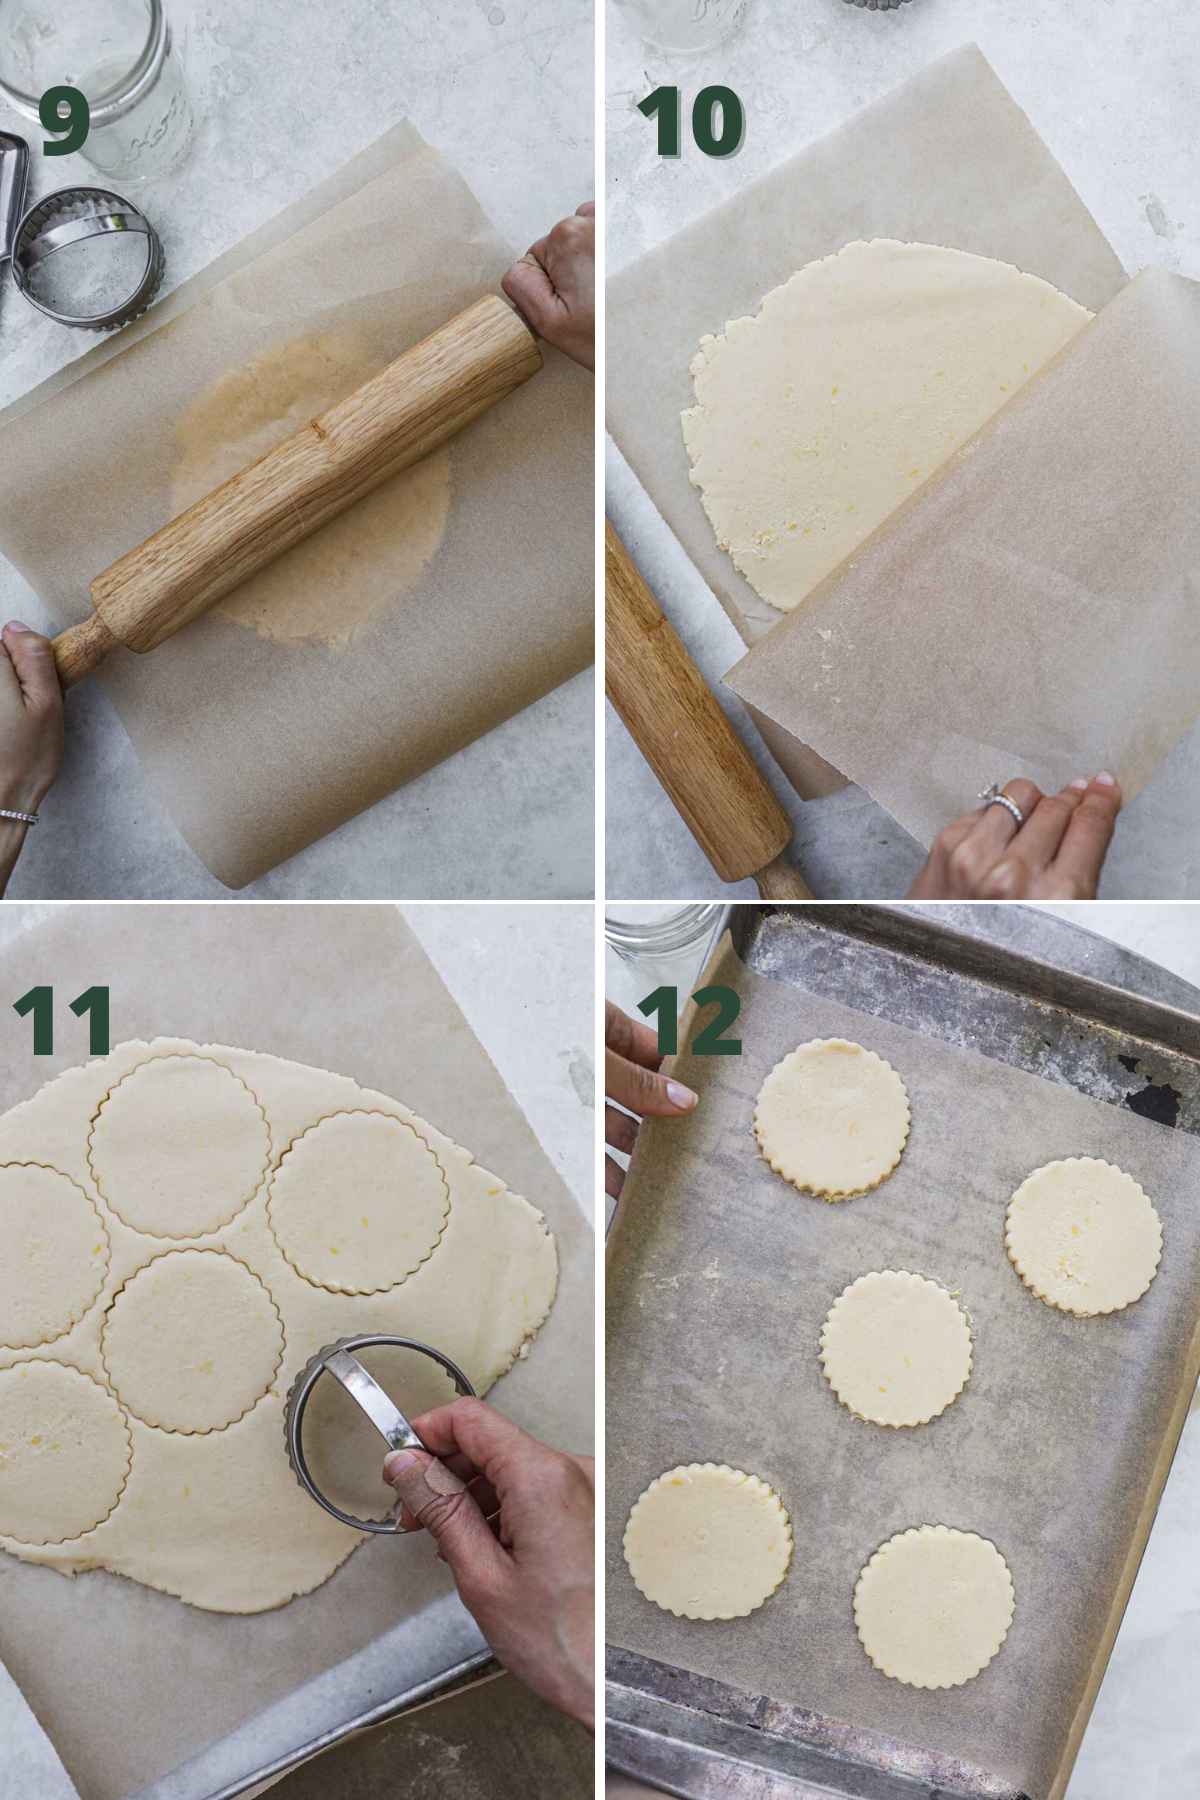 Steps to make edible flower shortbread cookies, rolling out the dough with parchment paper, chilling, cutting dough, and baking.